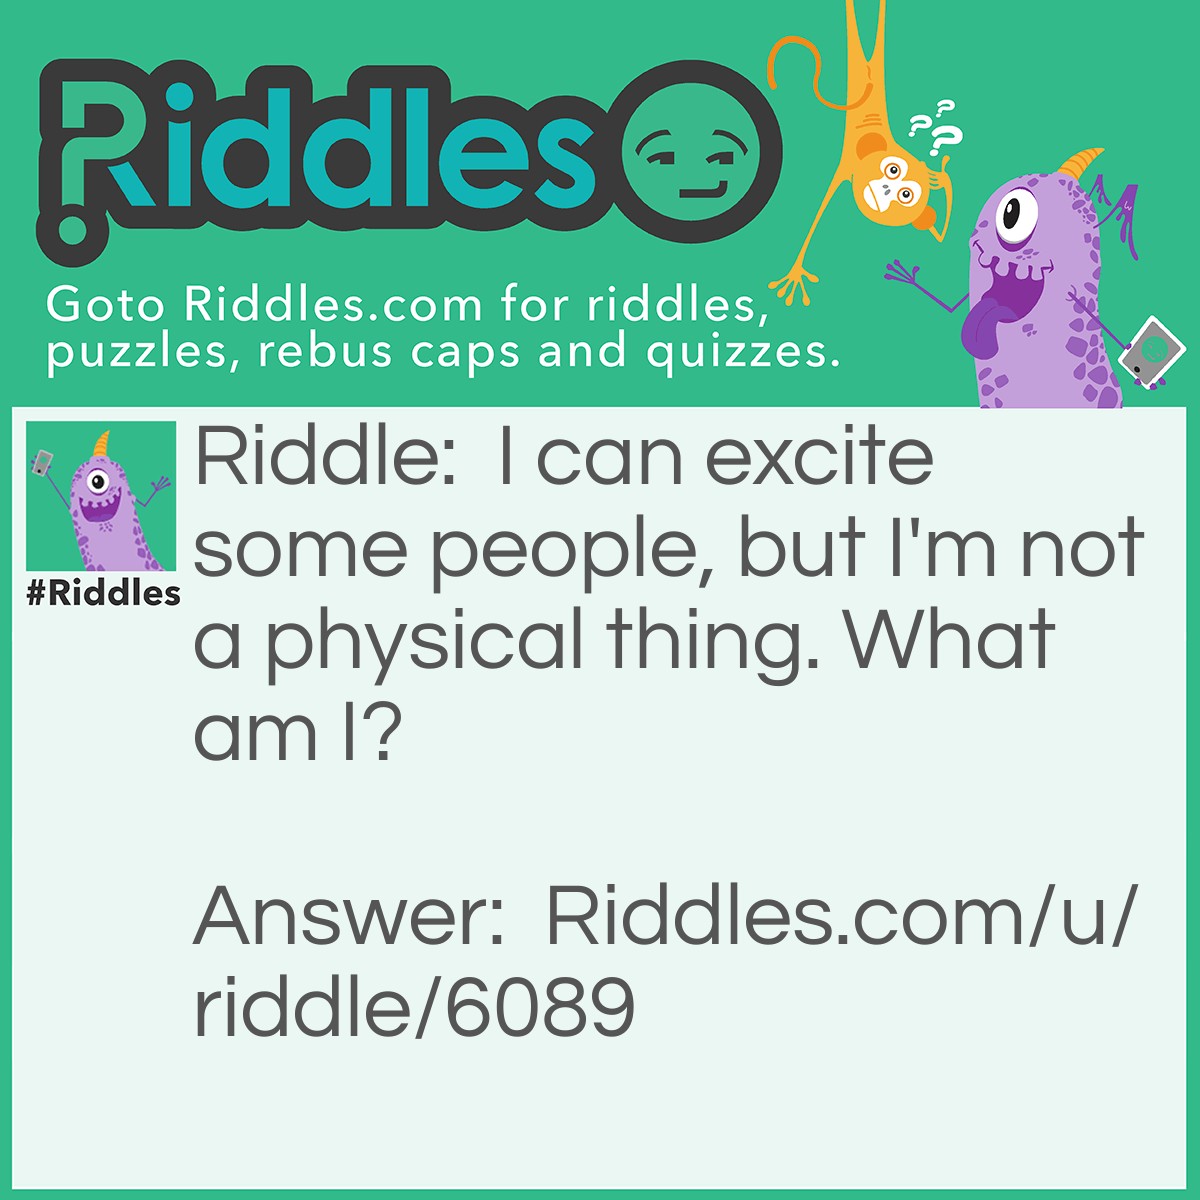 Riddle: I can excite some people, but I'm not a physical thing. What am I? Answer: An exclamation point!